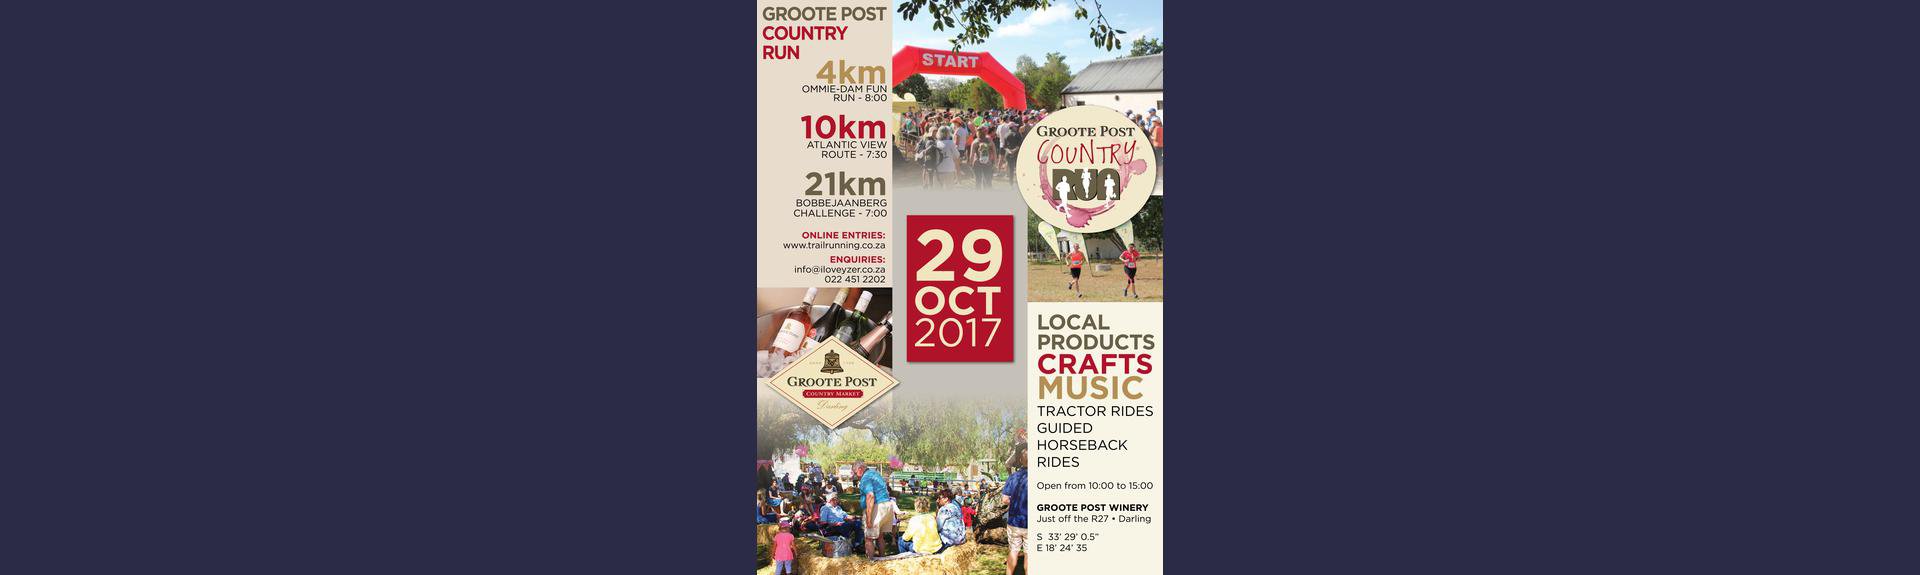 Groote Post Country Run